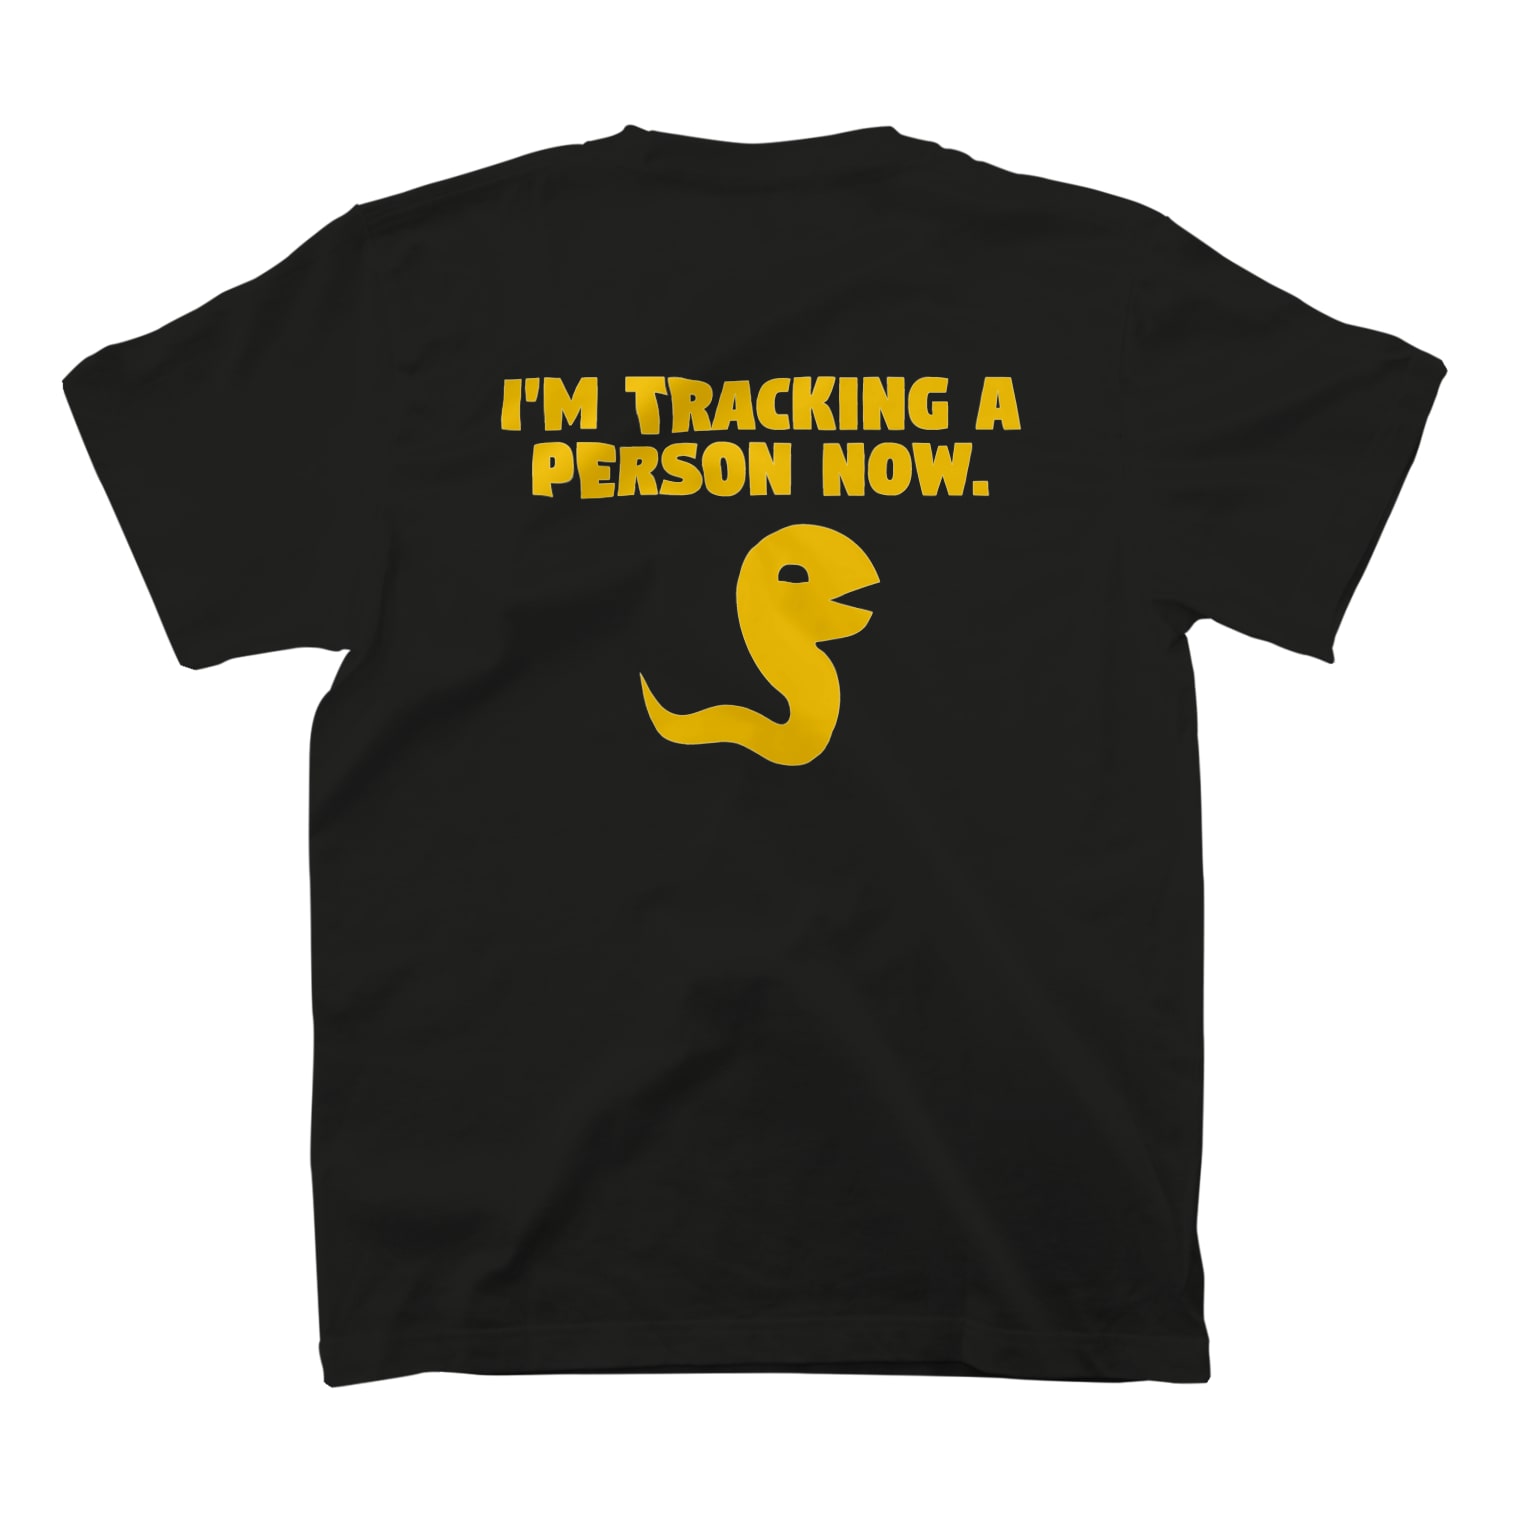 I'm tracking a person now TEE